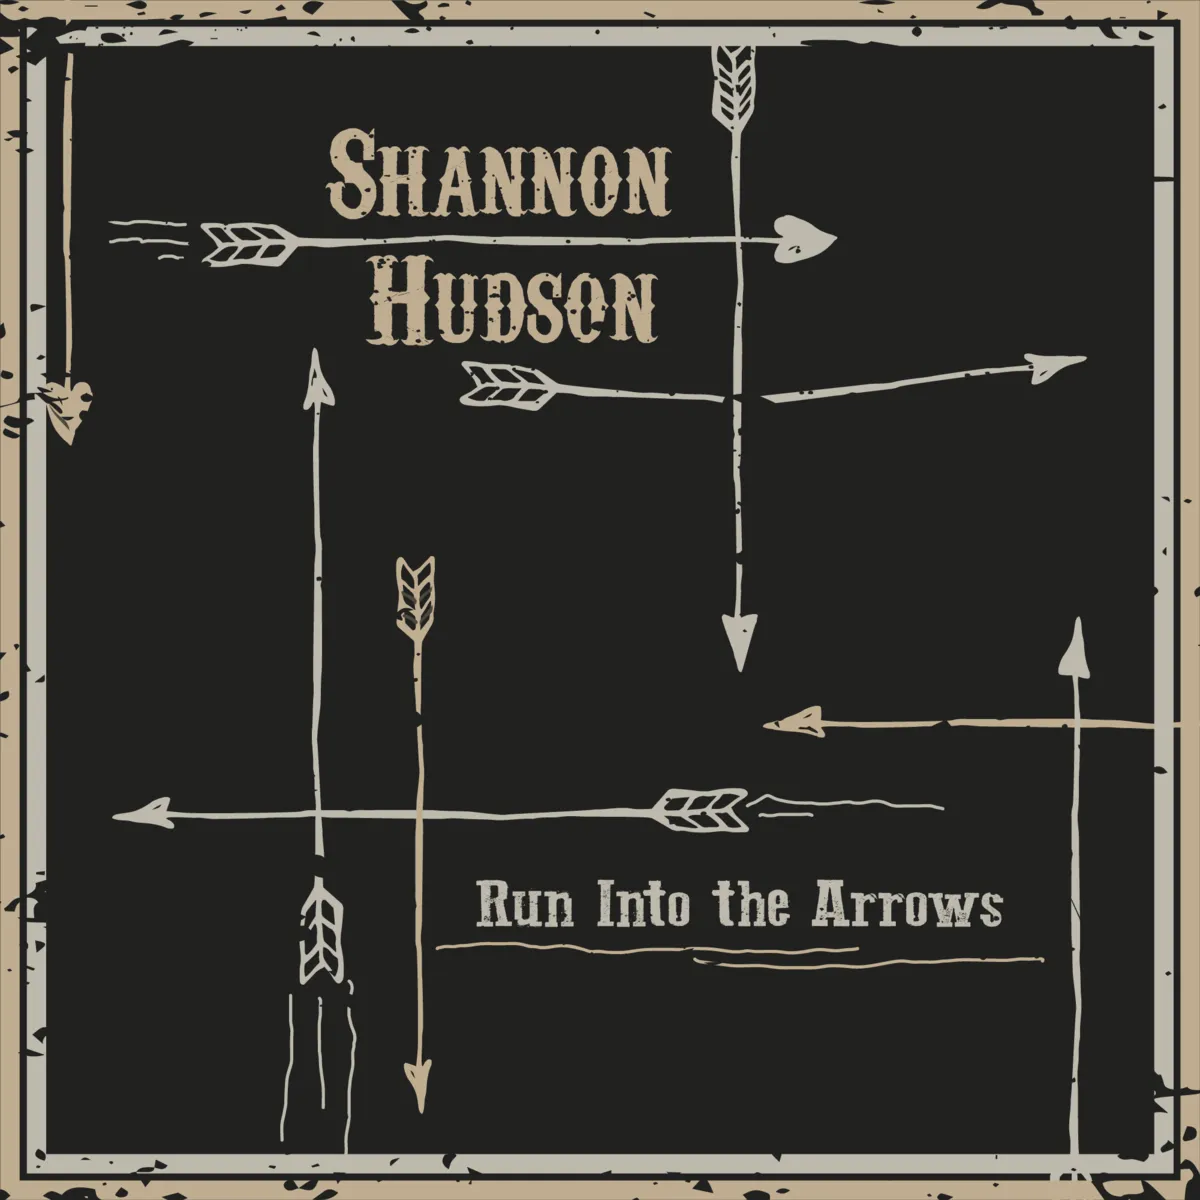 Run Into the Arrows LP (Vinyl) Limited Edition, Autographed, First Pressing (US Only)